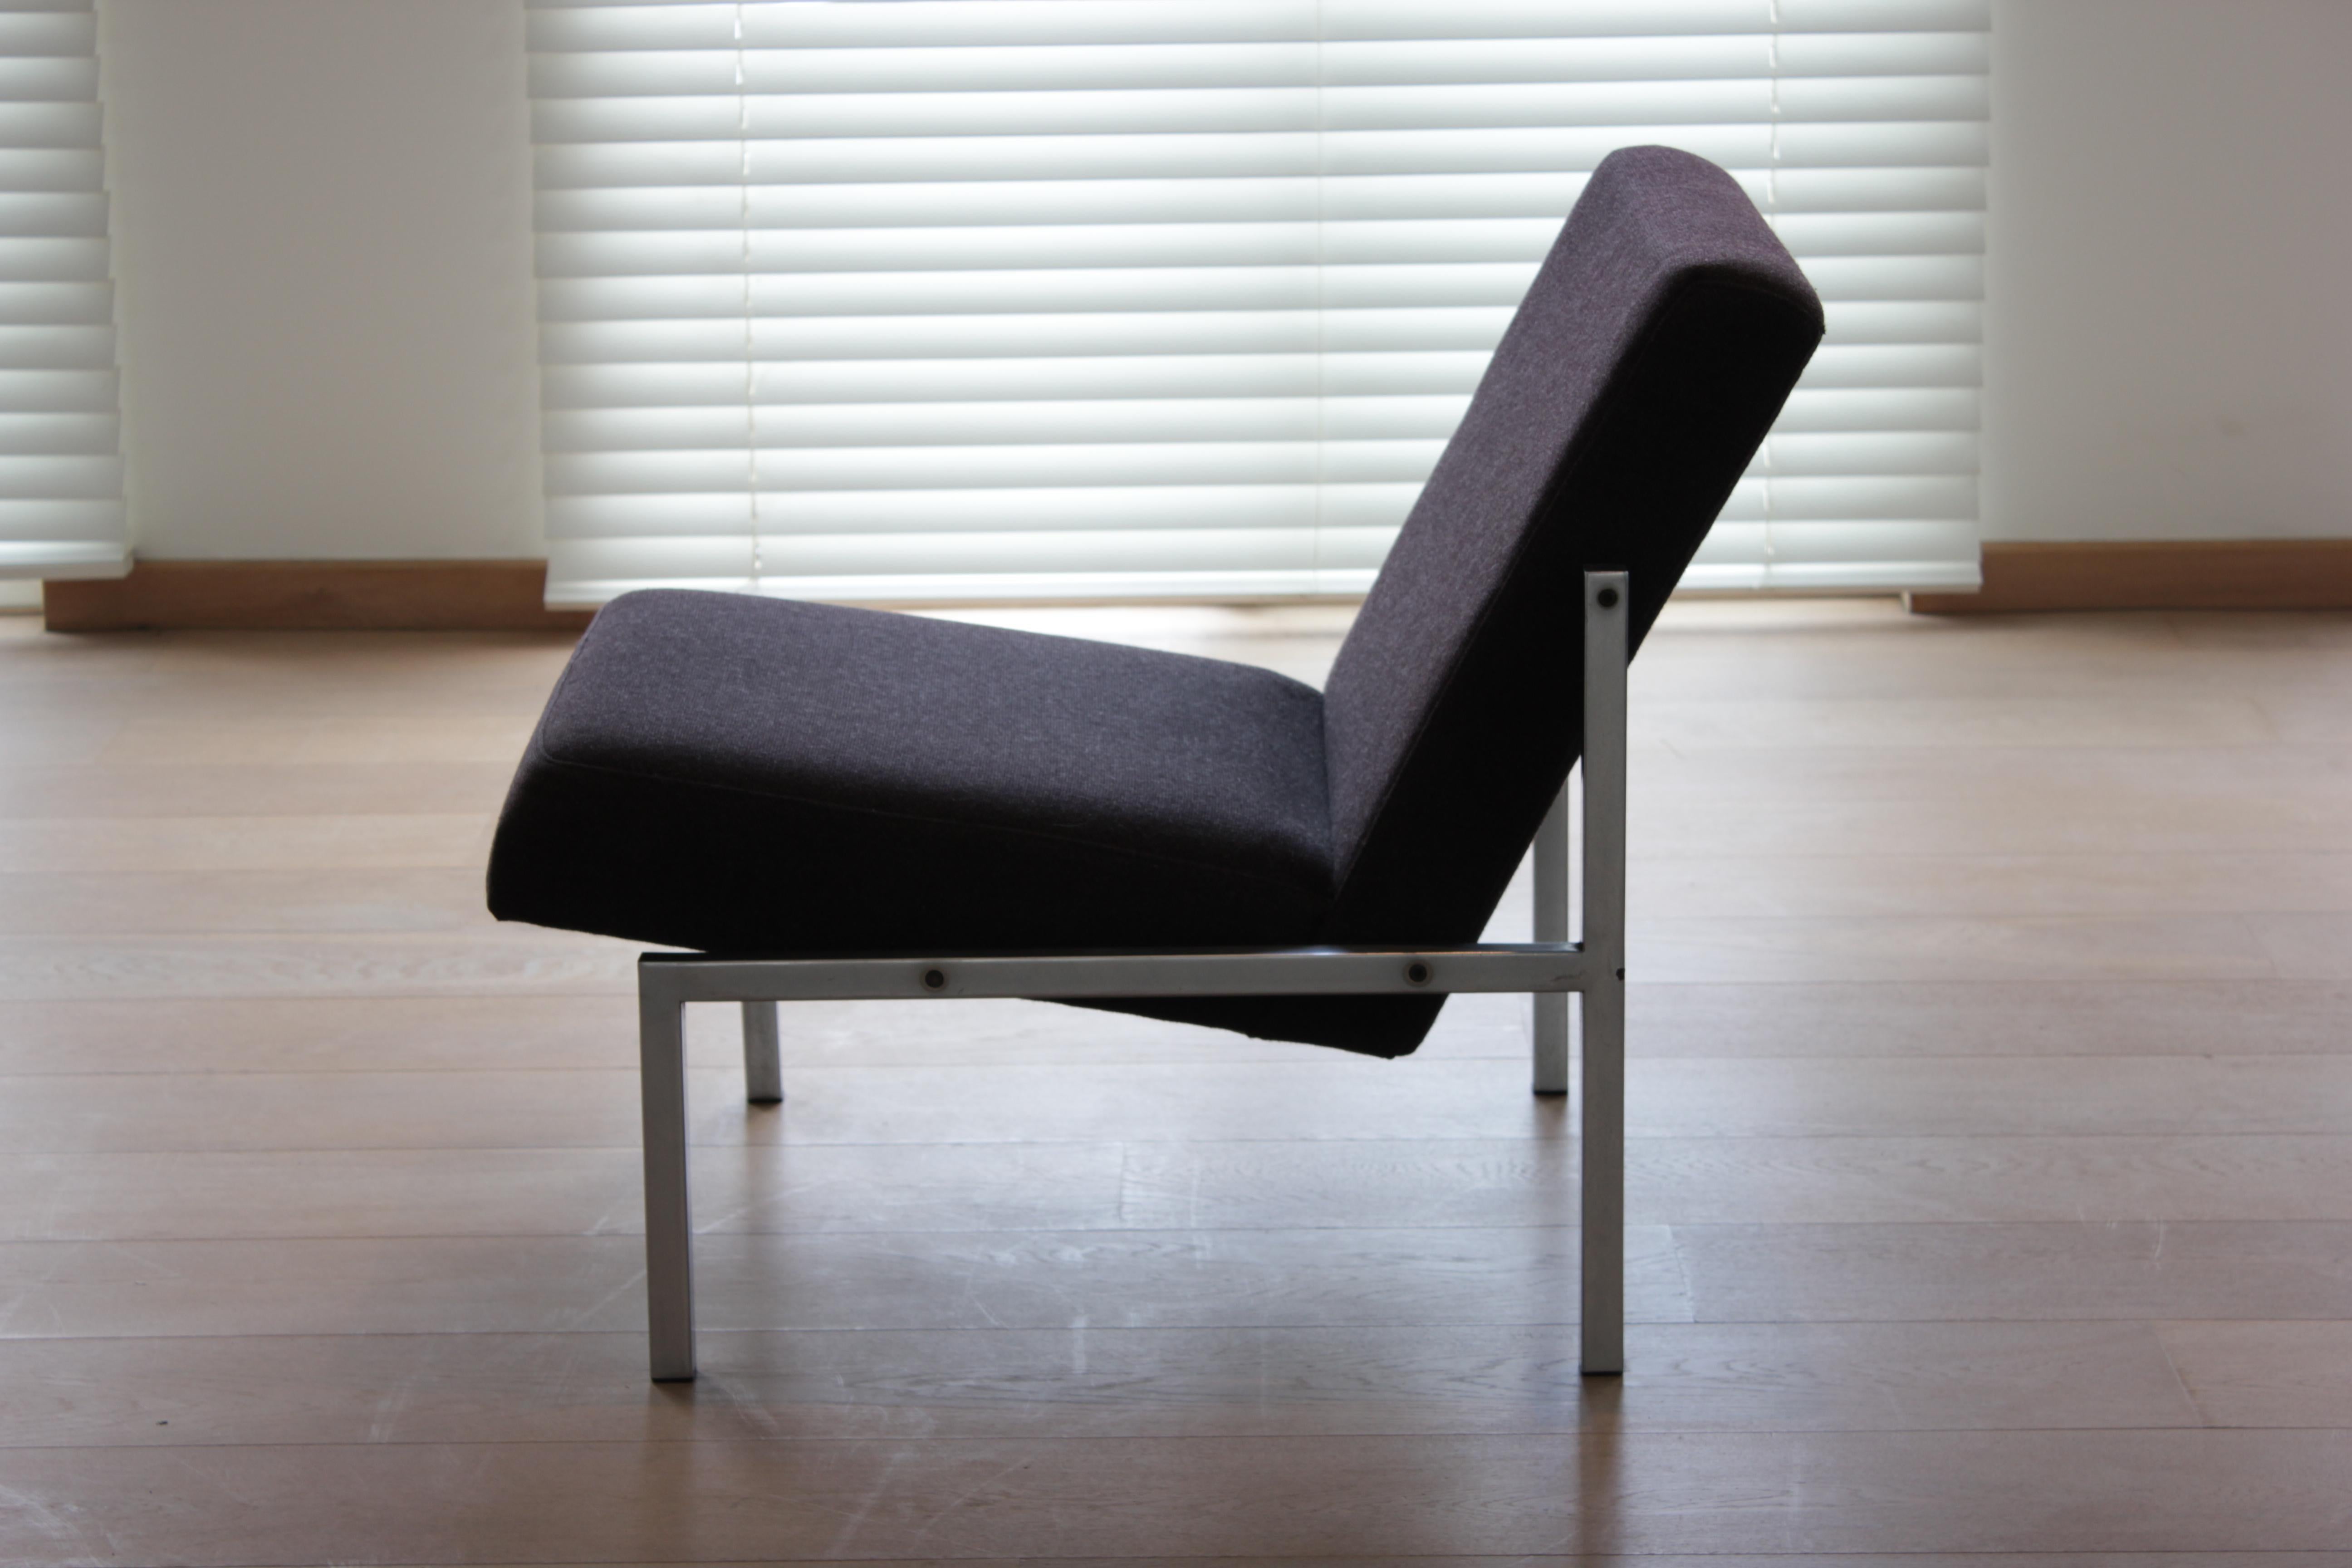 20th Century Pair of SZ11 Lounge Chairs by Martin Visser for 't Spectrum, 1960s For Sale